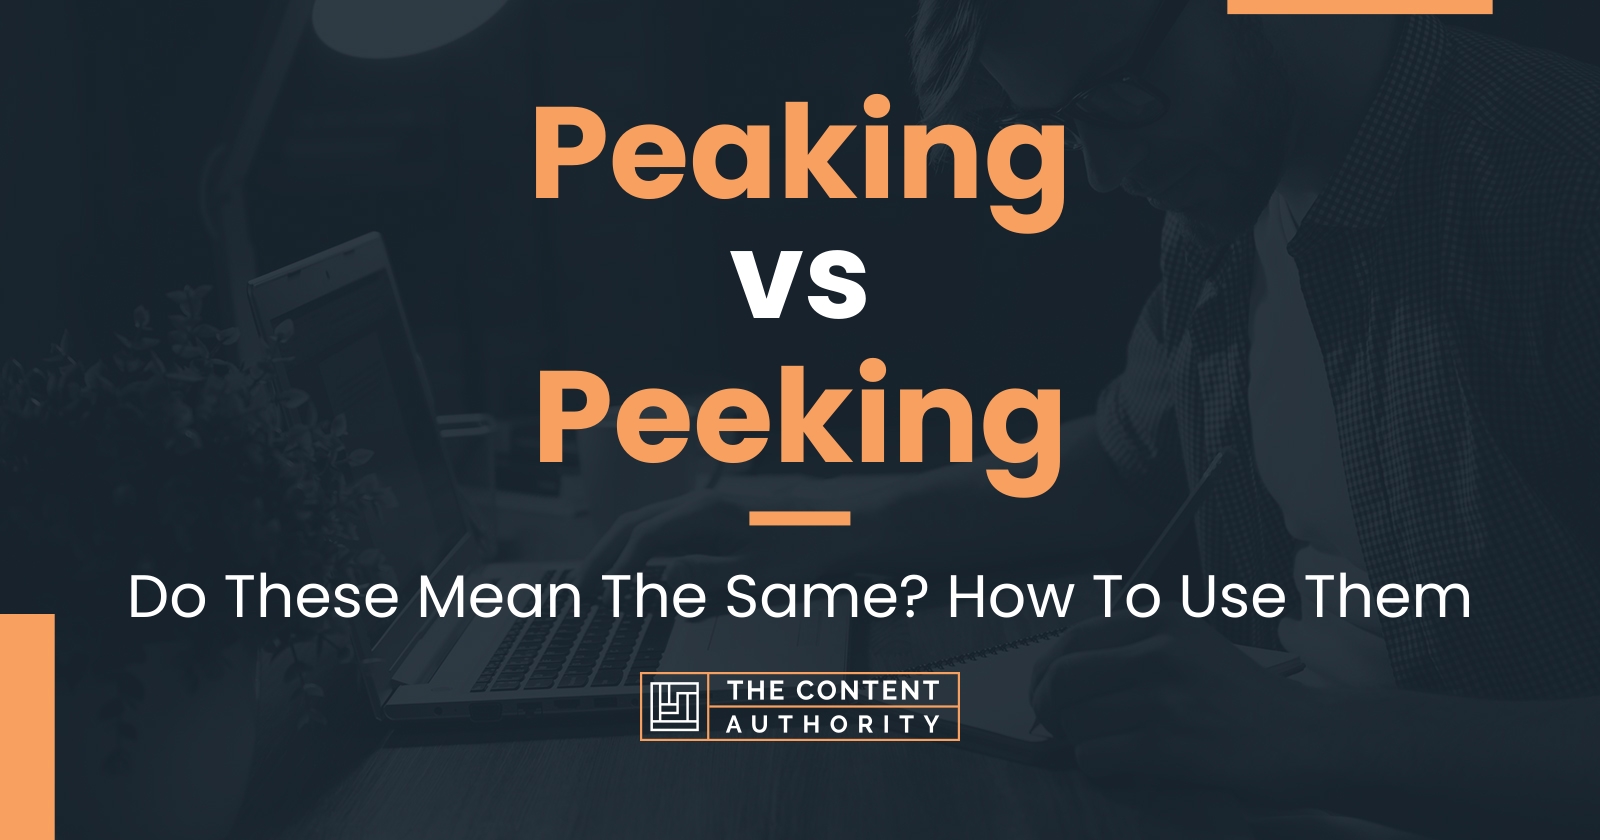 Peaking vs Peeking: Do These Mean The Same? How To Use Them